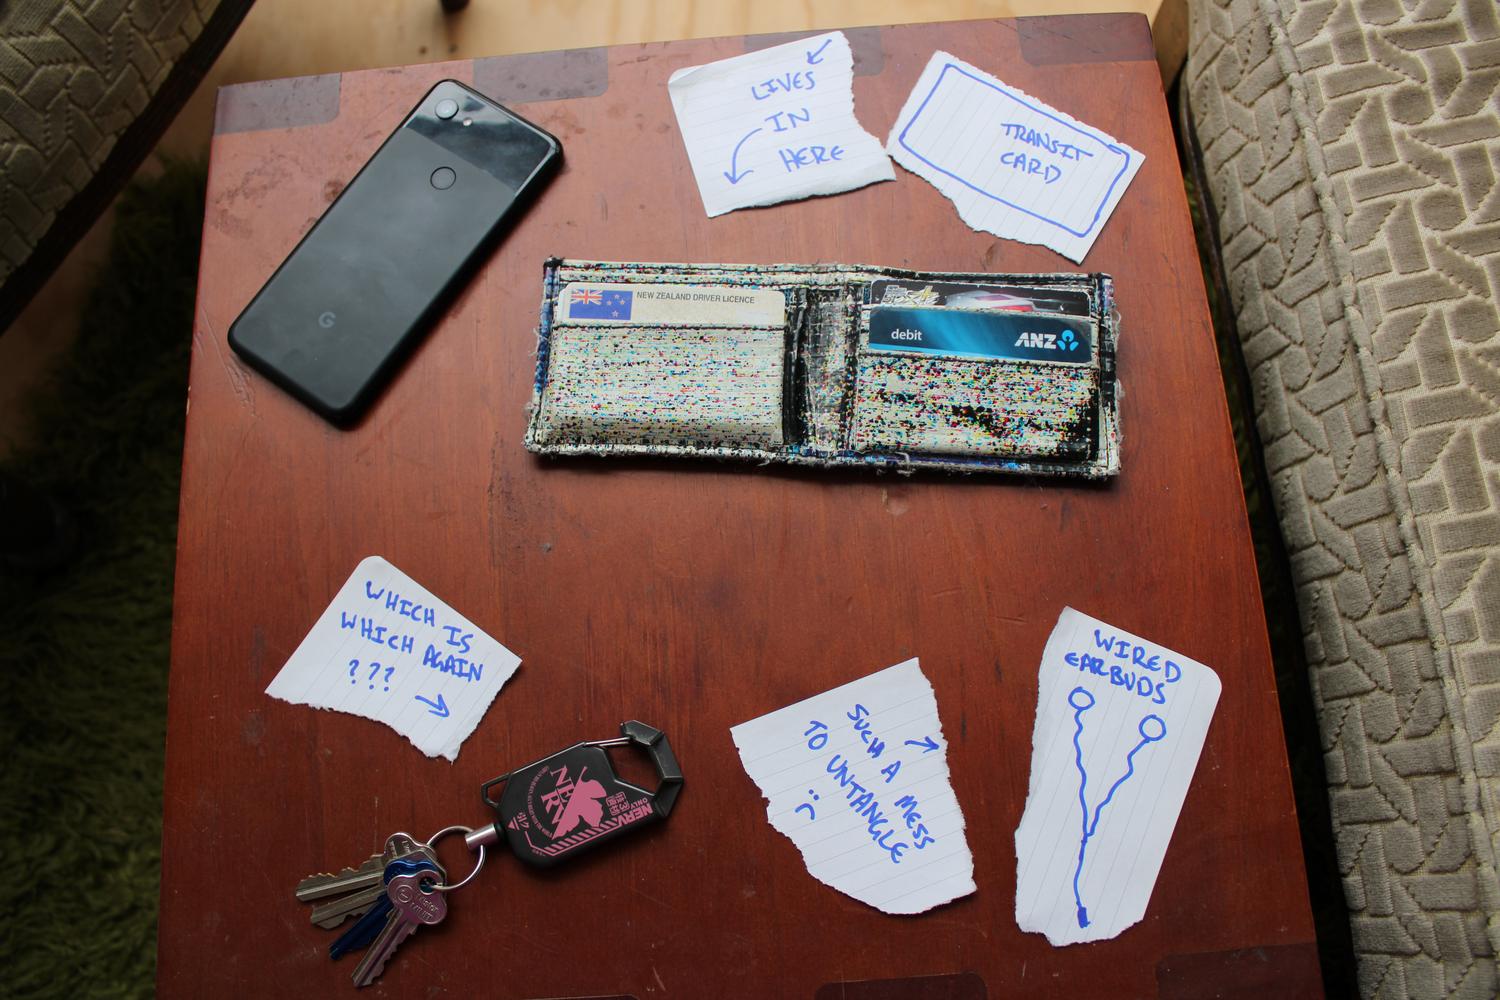 An aerial photo of a table containing items I carry each day, with pieces of paper beside each item describing the problems with each. The photo contains my phone, wallet, keys and wired earbuds. I didn&rsquo;t actually have the wired earbuds anymore so I&rsquo;ve just drawn a picture to represent them.